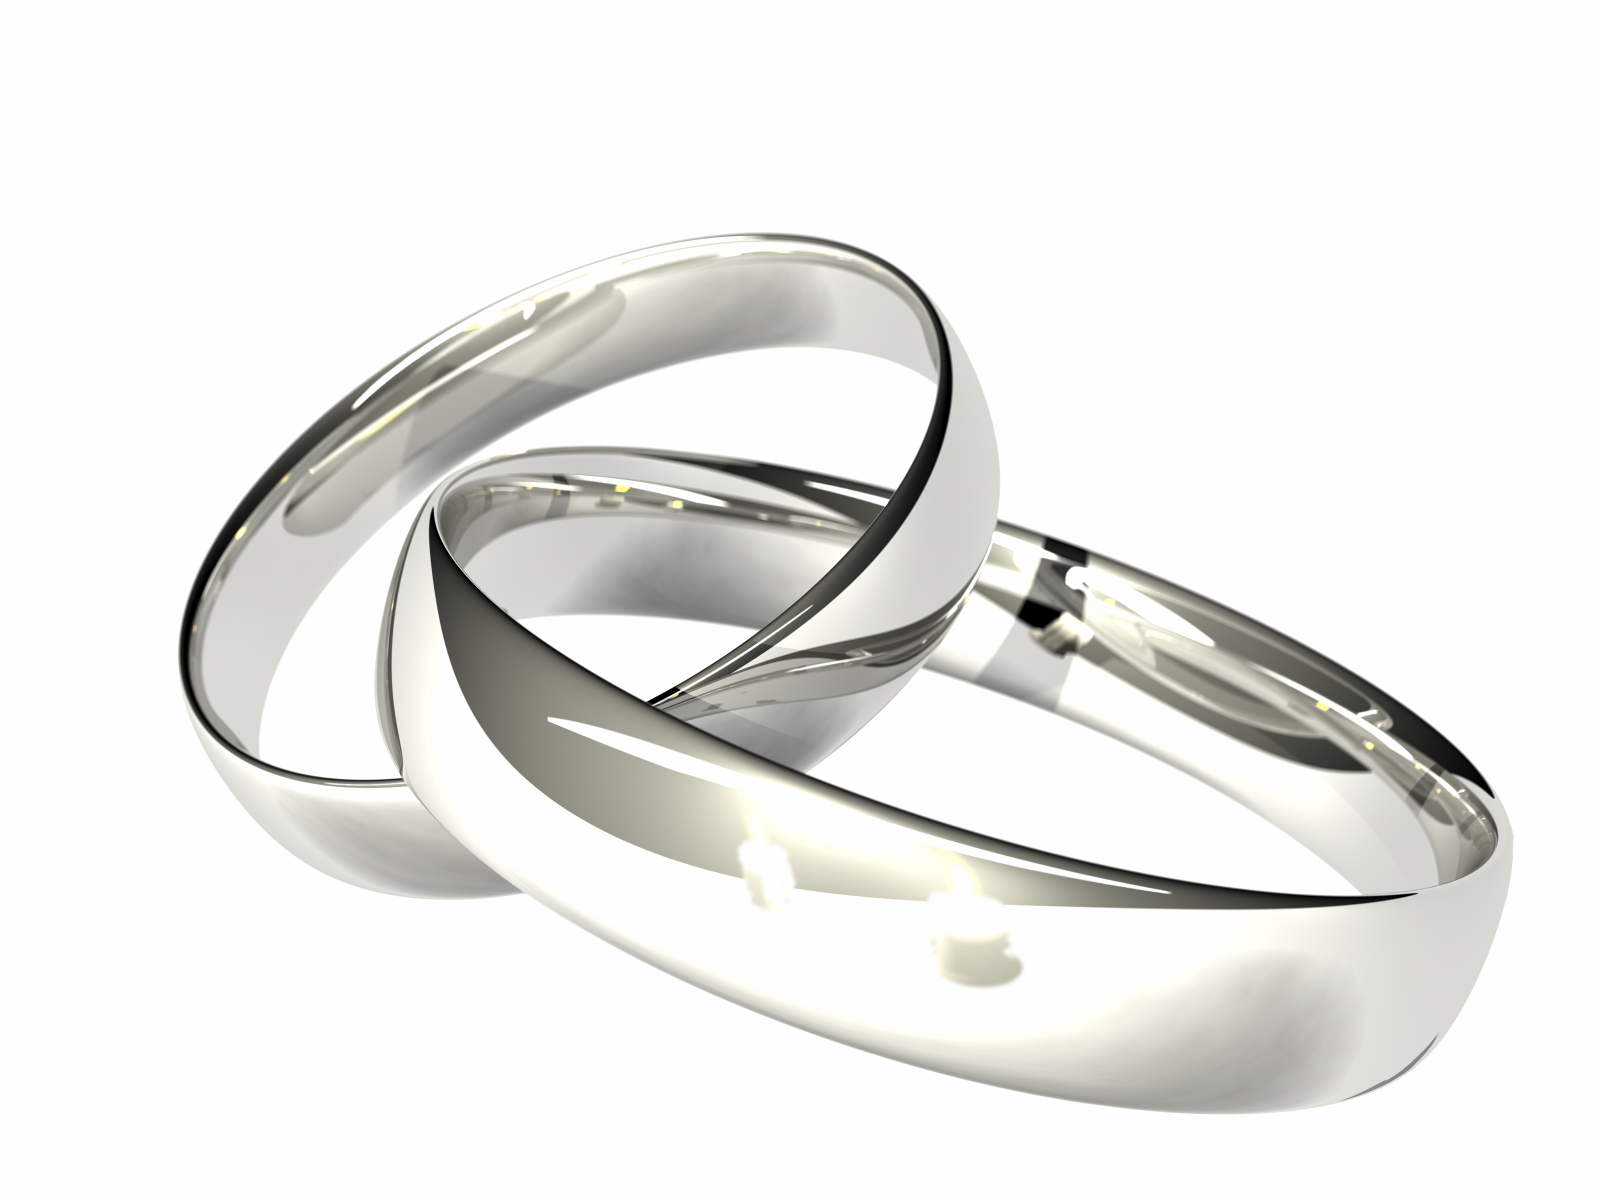  Wedding  Pictures Wedding  Photos Silver Wedding Rings  Pictures